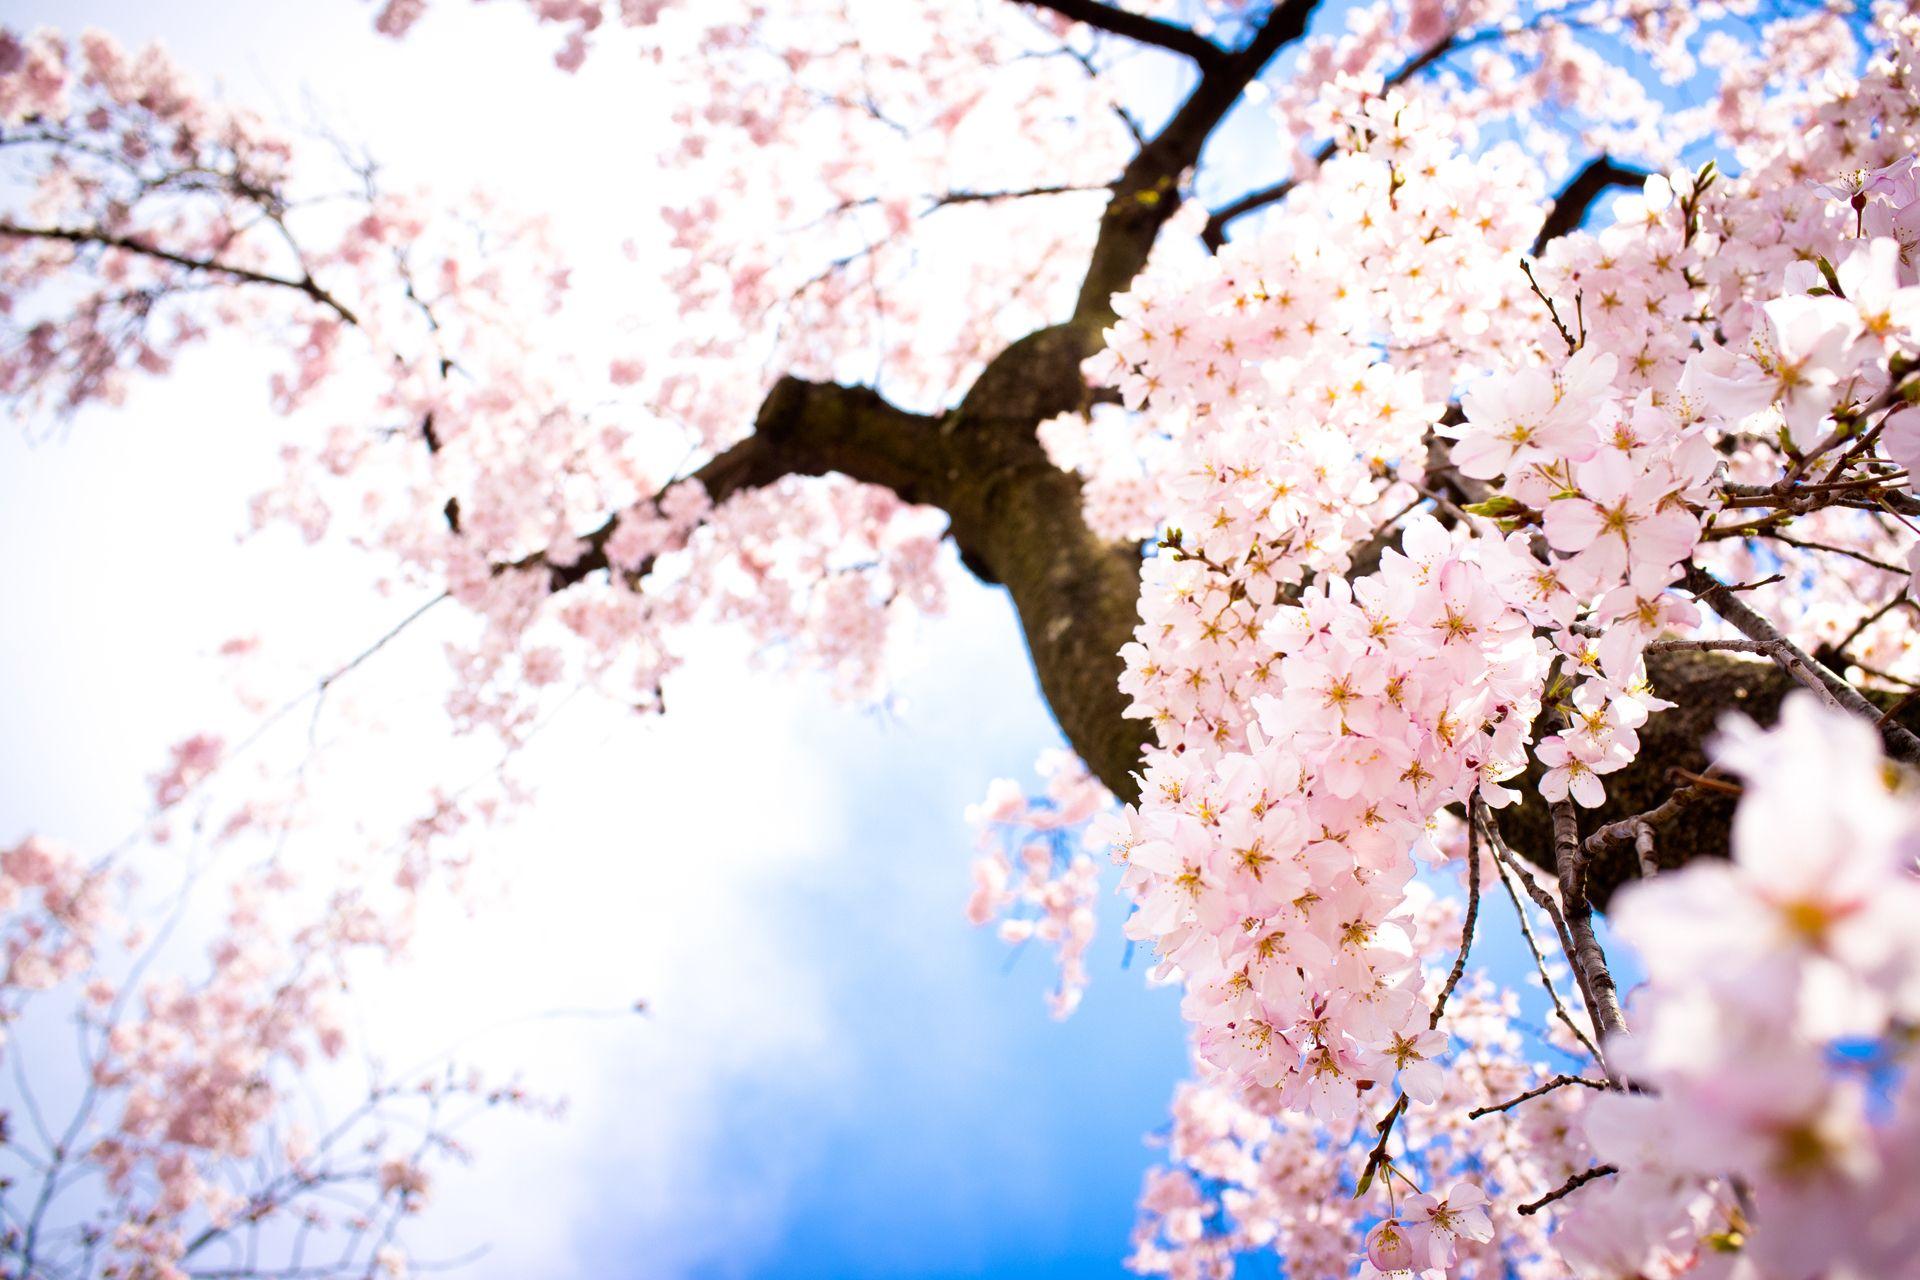 Wallpaper Red Cherry Blossom Wallpapers